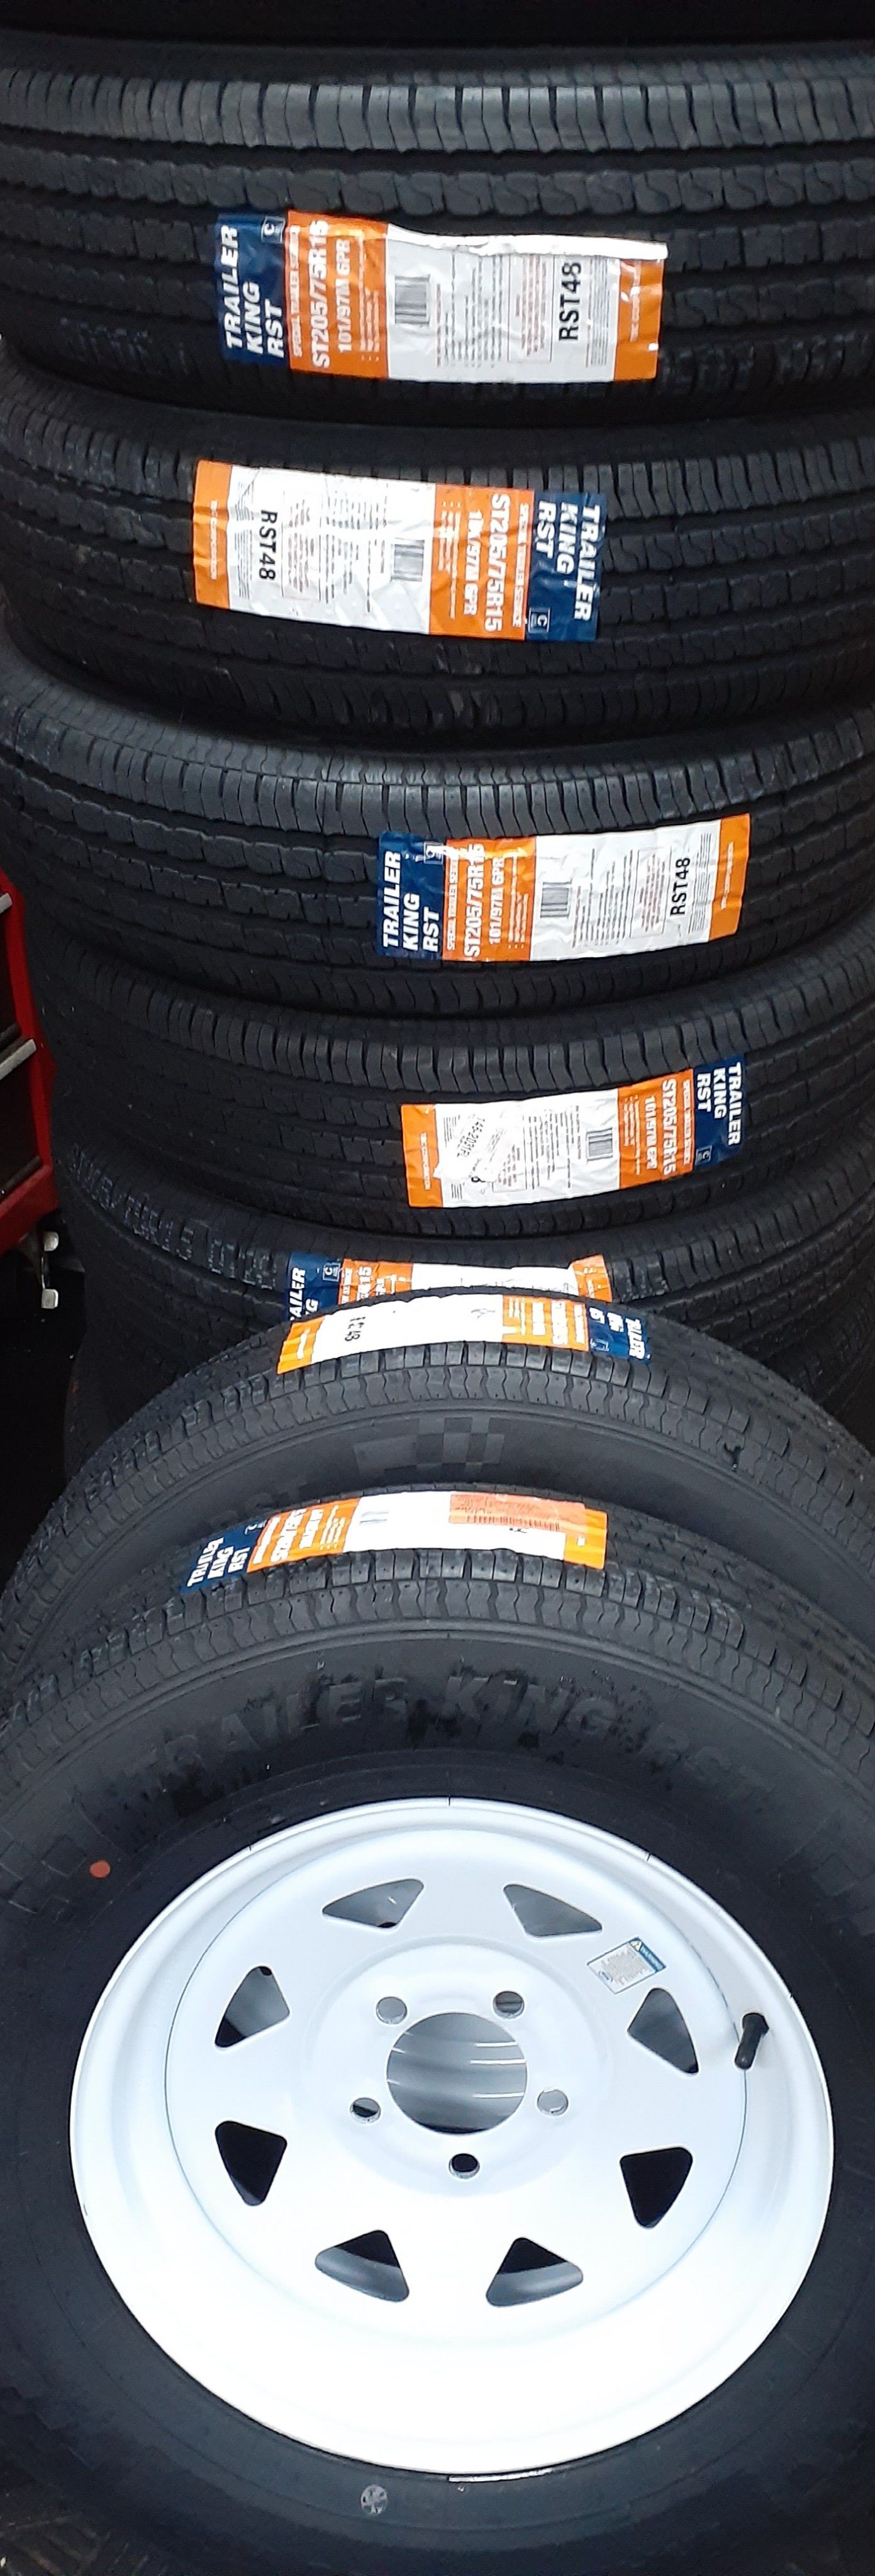 New trailer tires or wheels size 8 up to 16